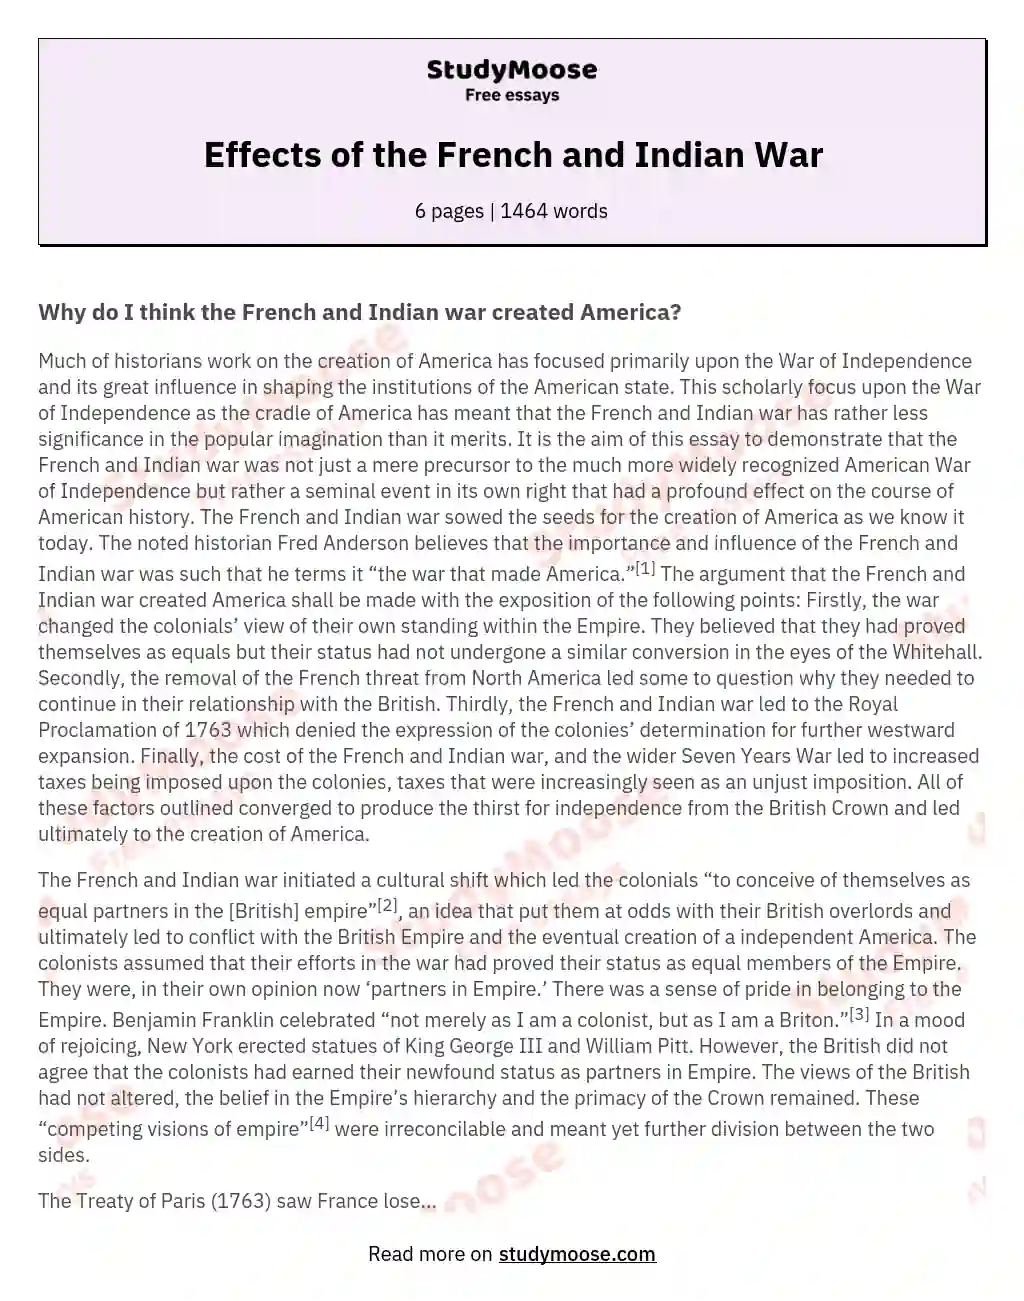 causes and effects of the french and indian war essay